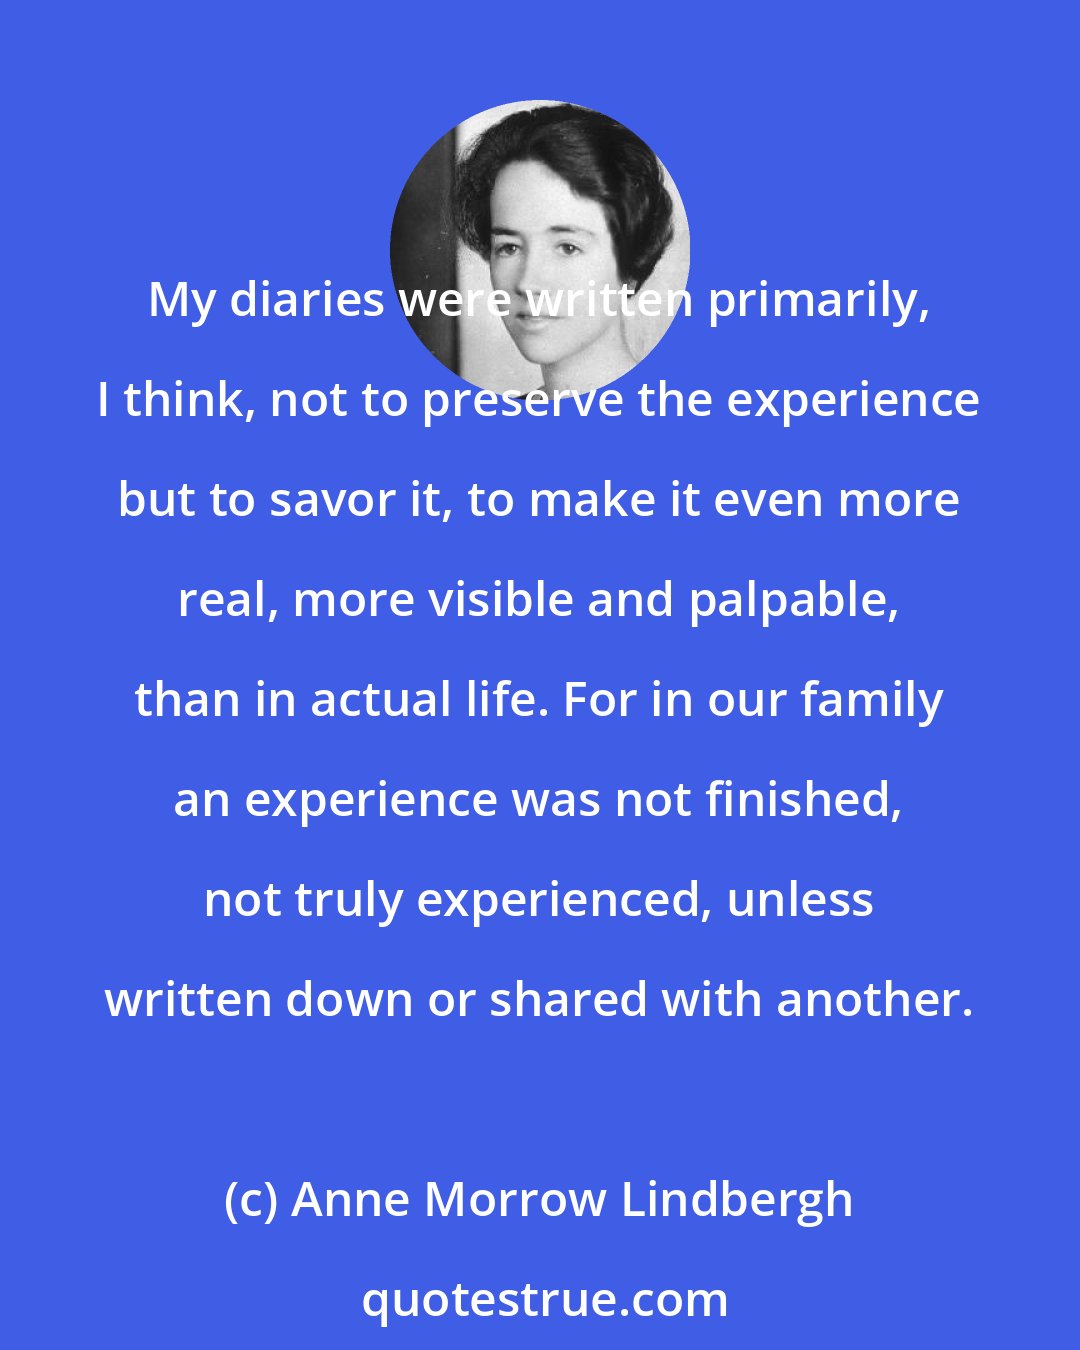 Anne Morrow Lindbergh: My diaries were written primarily, I think, not to preserve the experience but to savor it, to make it even more real, more visible and palpable, than in actual life. For in our family an experience was not finished, not truly experienced, unless written down or shared with another.